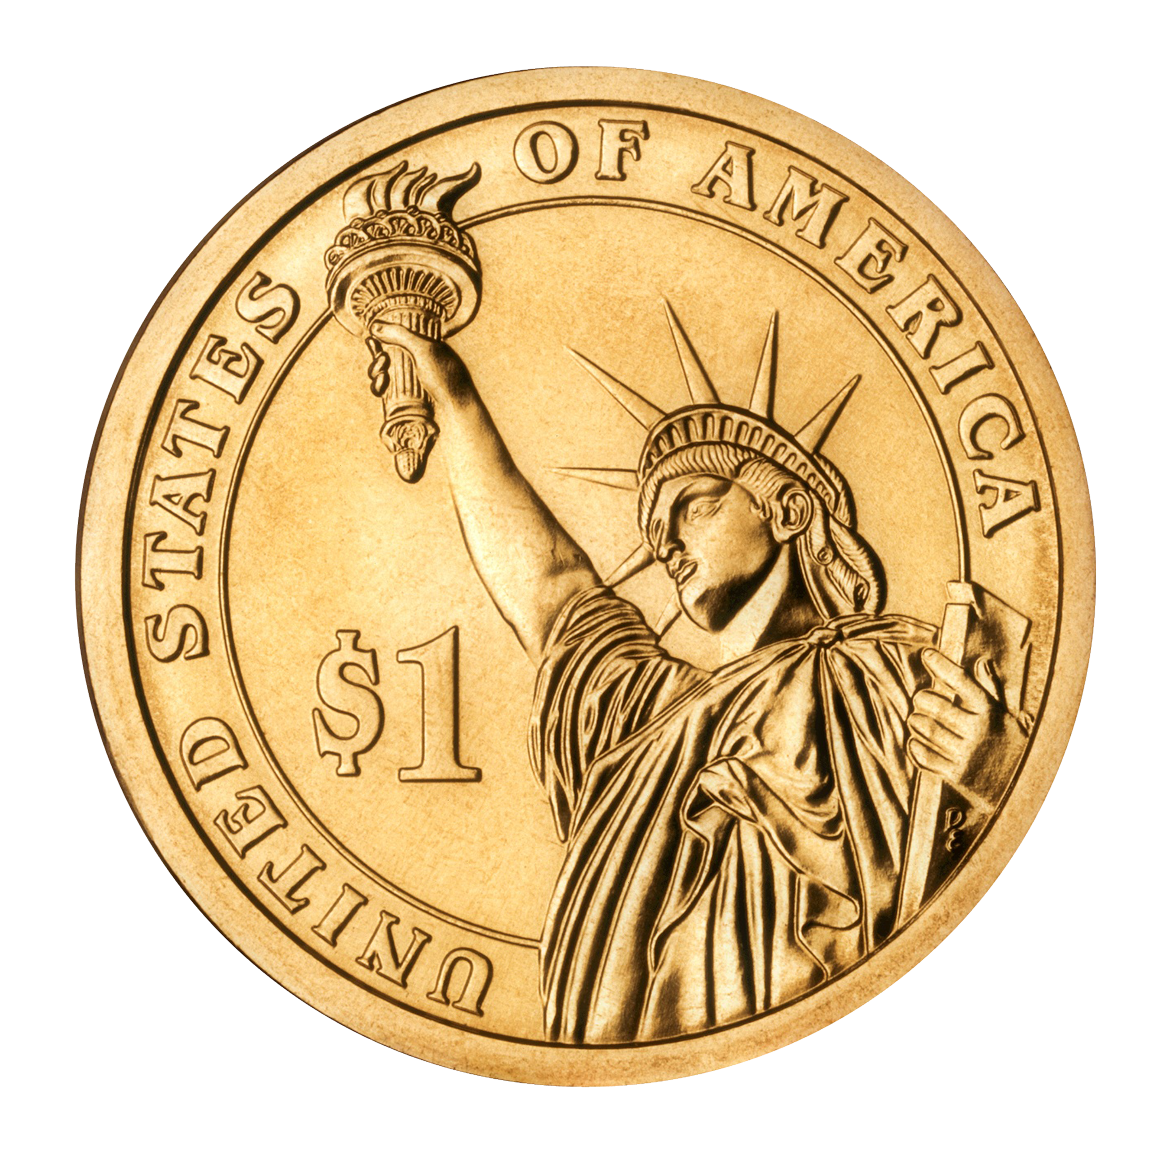 Dollar Coin Png Transparent Image   Coin Hd Png - Coin, Transparent background PNG HD thumbnail